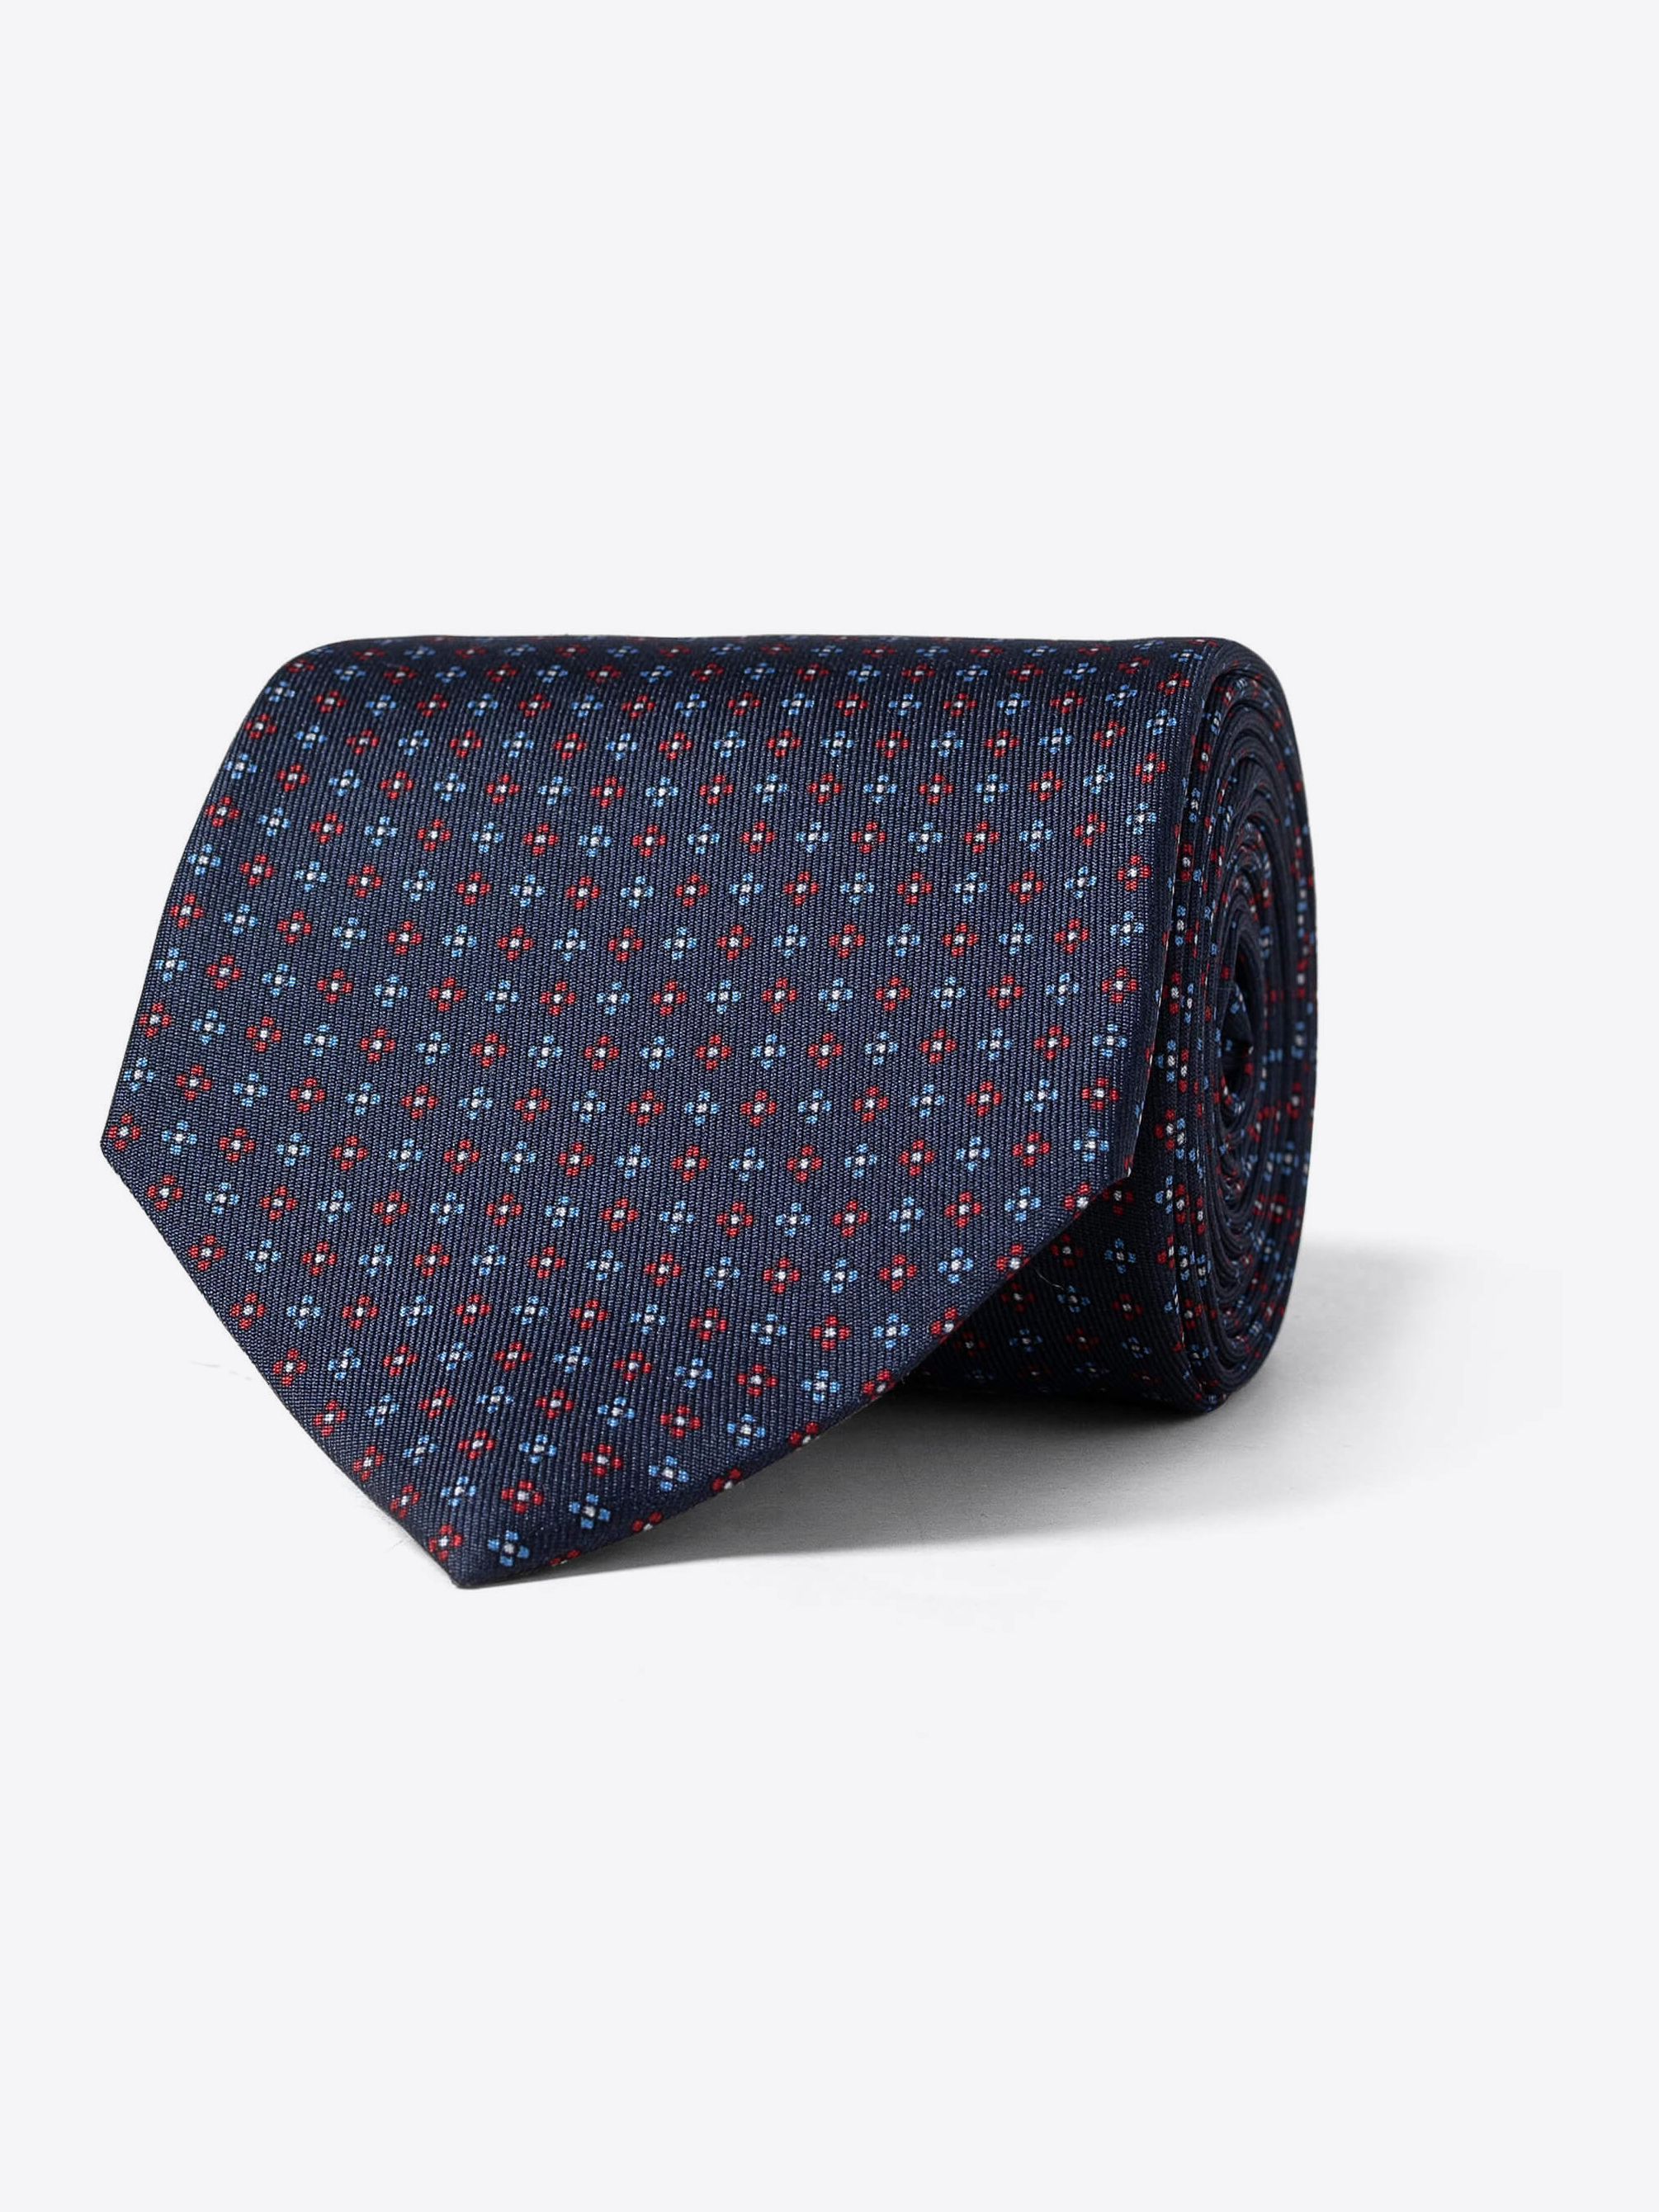 Zoom Image of Navy Red and Light Blue Small Foulard Silk Tie